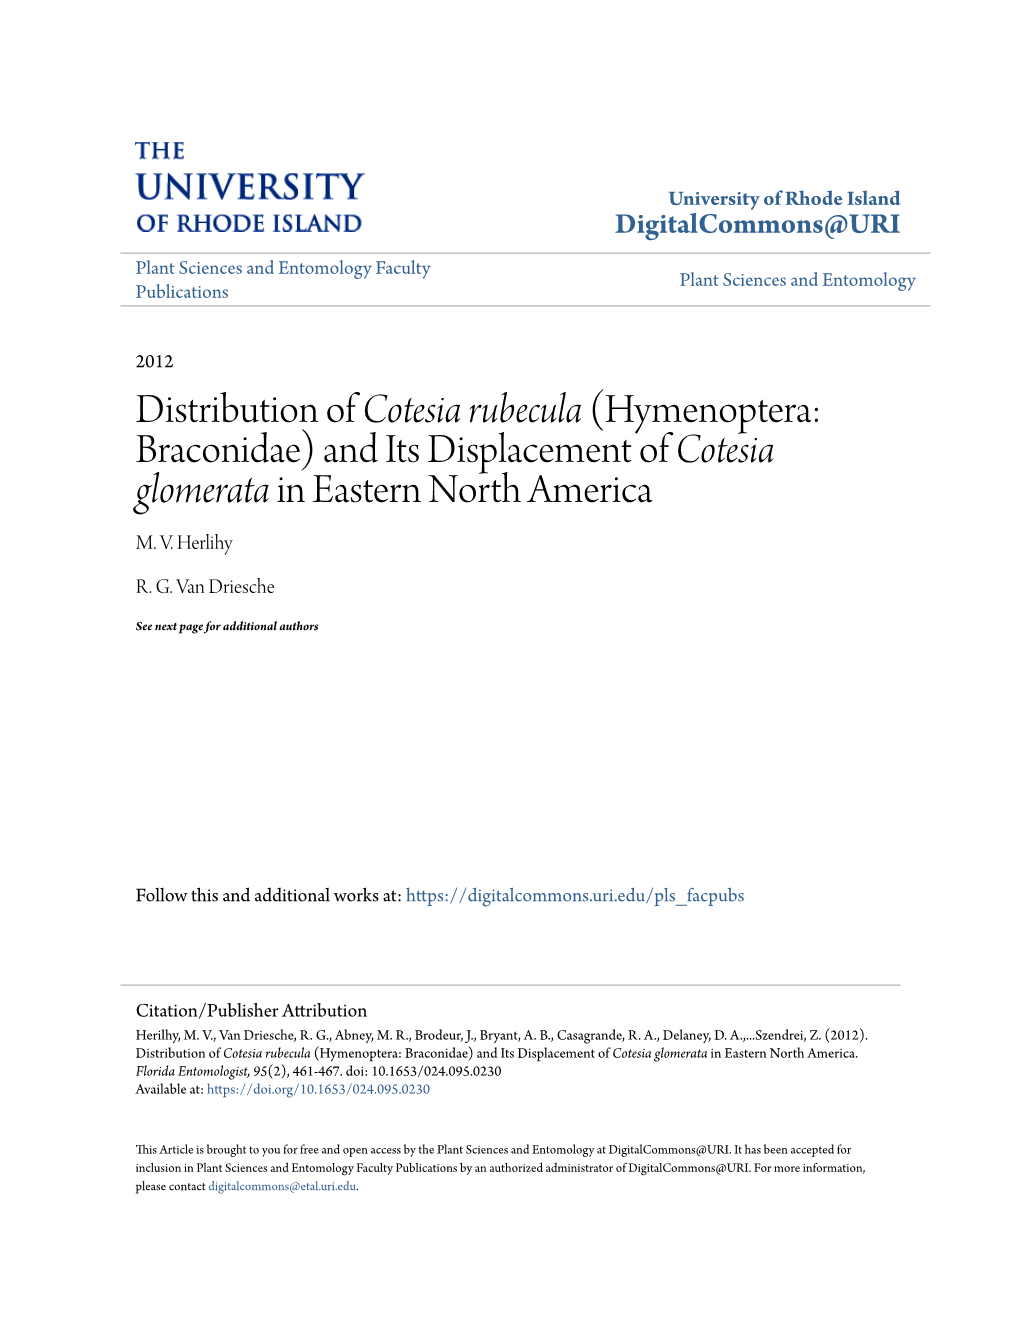 Hymenoptera: Braconidae) and Its Displacement of Cotesia Glomerata in Eastern North America M